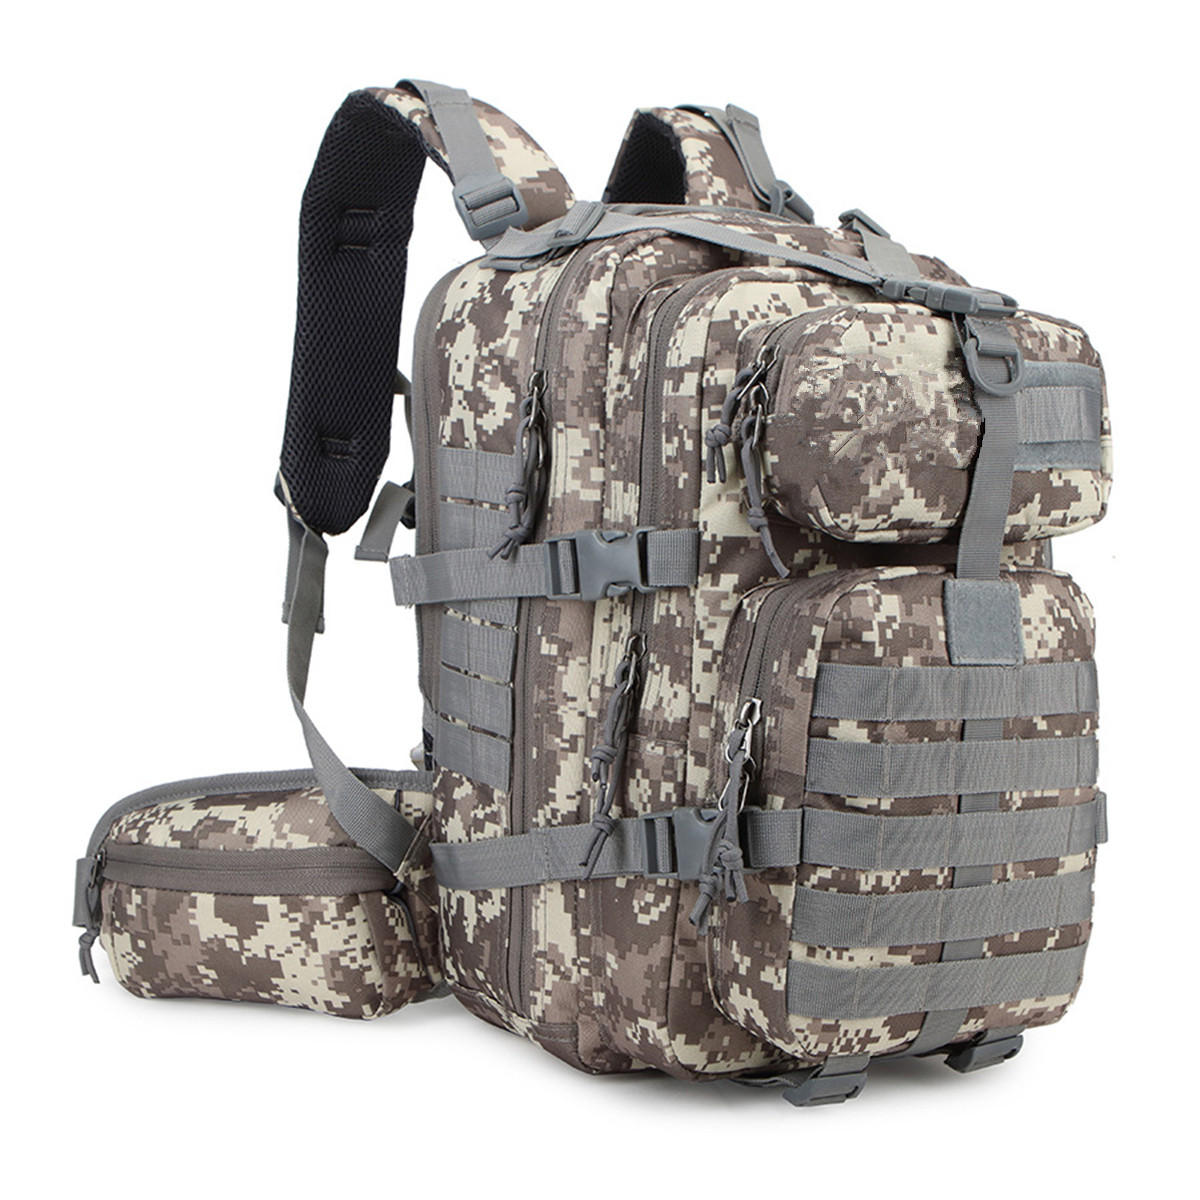 Details about   35L Military Tactical Climbing Camouflage Backpack Hiking Trekking Rucksack 